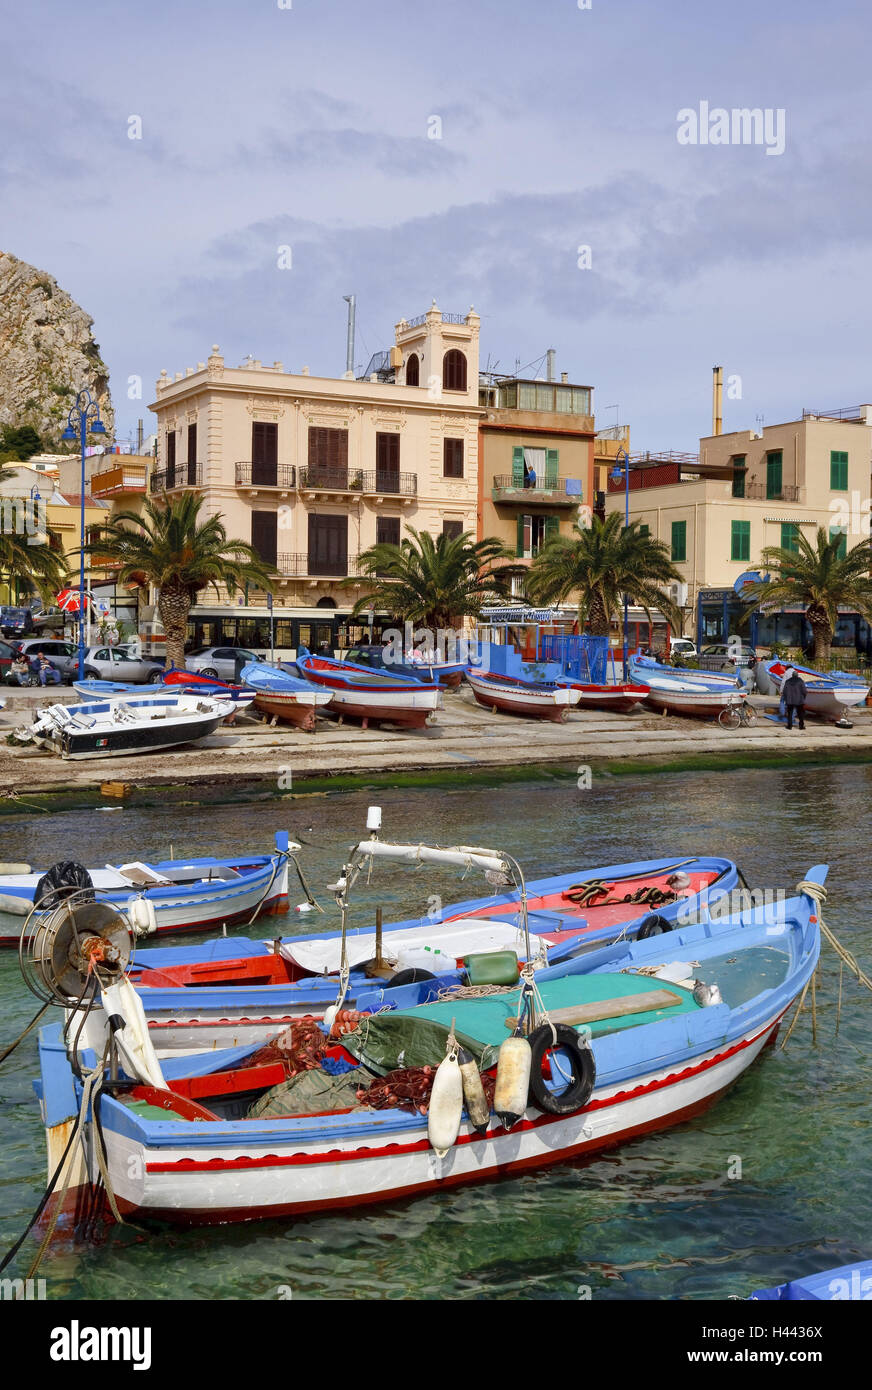 Italy, Sicily, Mondello, town view, harbour, boots, Europe, Southern, Europe, town, port, building, houses, architecture, landing stage, fishing boats, wooden boots, tourism, palms, Stock Photo